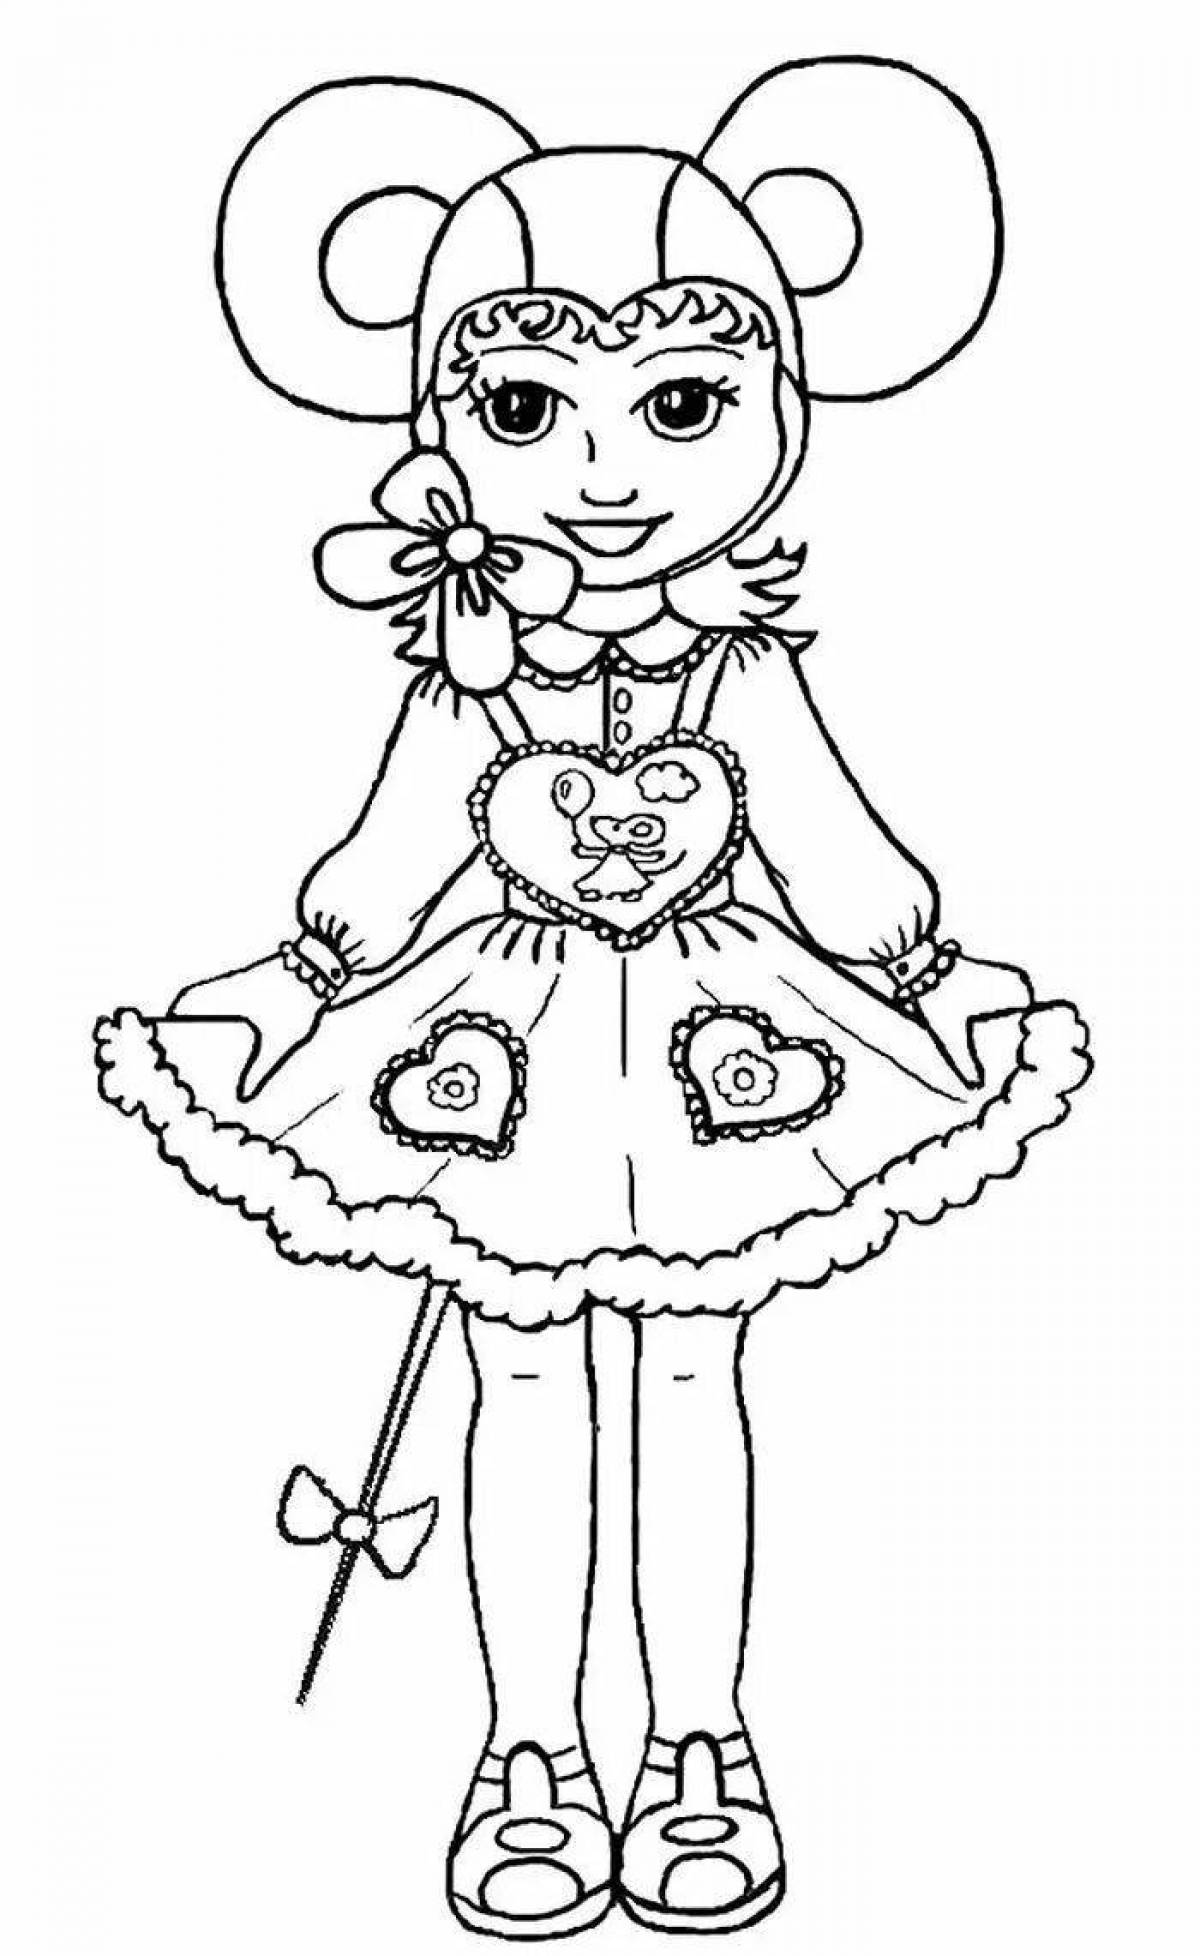 Coloring page shining carnival costume